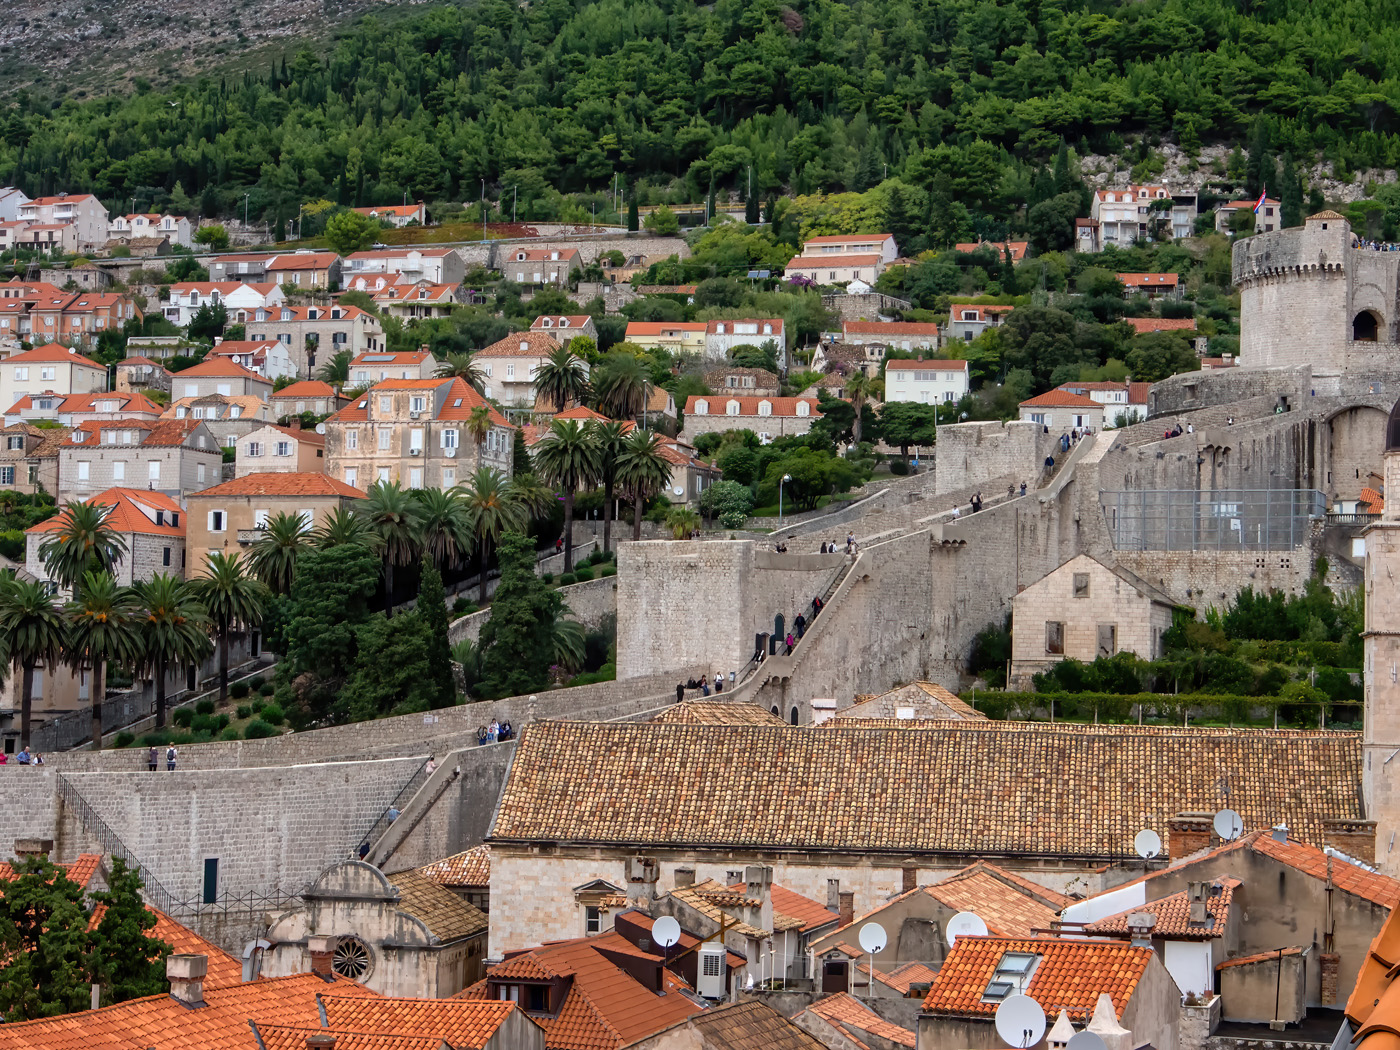 People on the Dubrovnik Wall